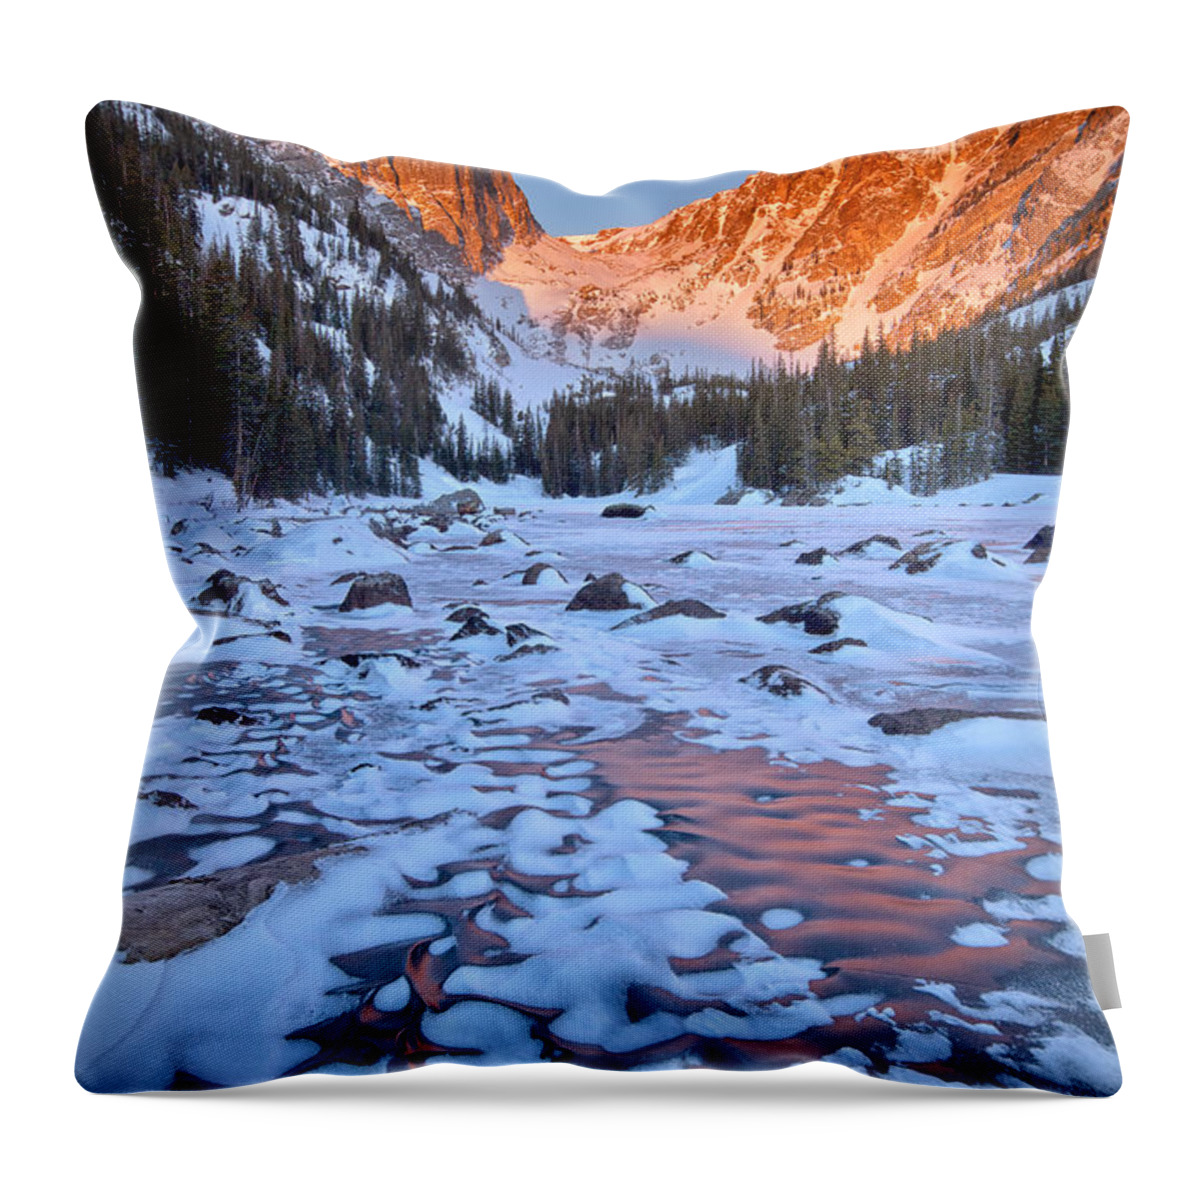 Rocky Mountain National Park Throw Pillow featuring the photograph Dream Lake - Rocky Mountain National Park by Ronda Kimbrow